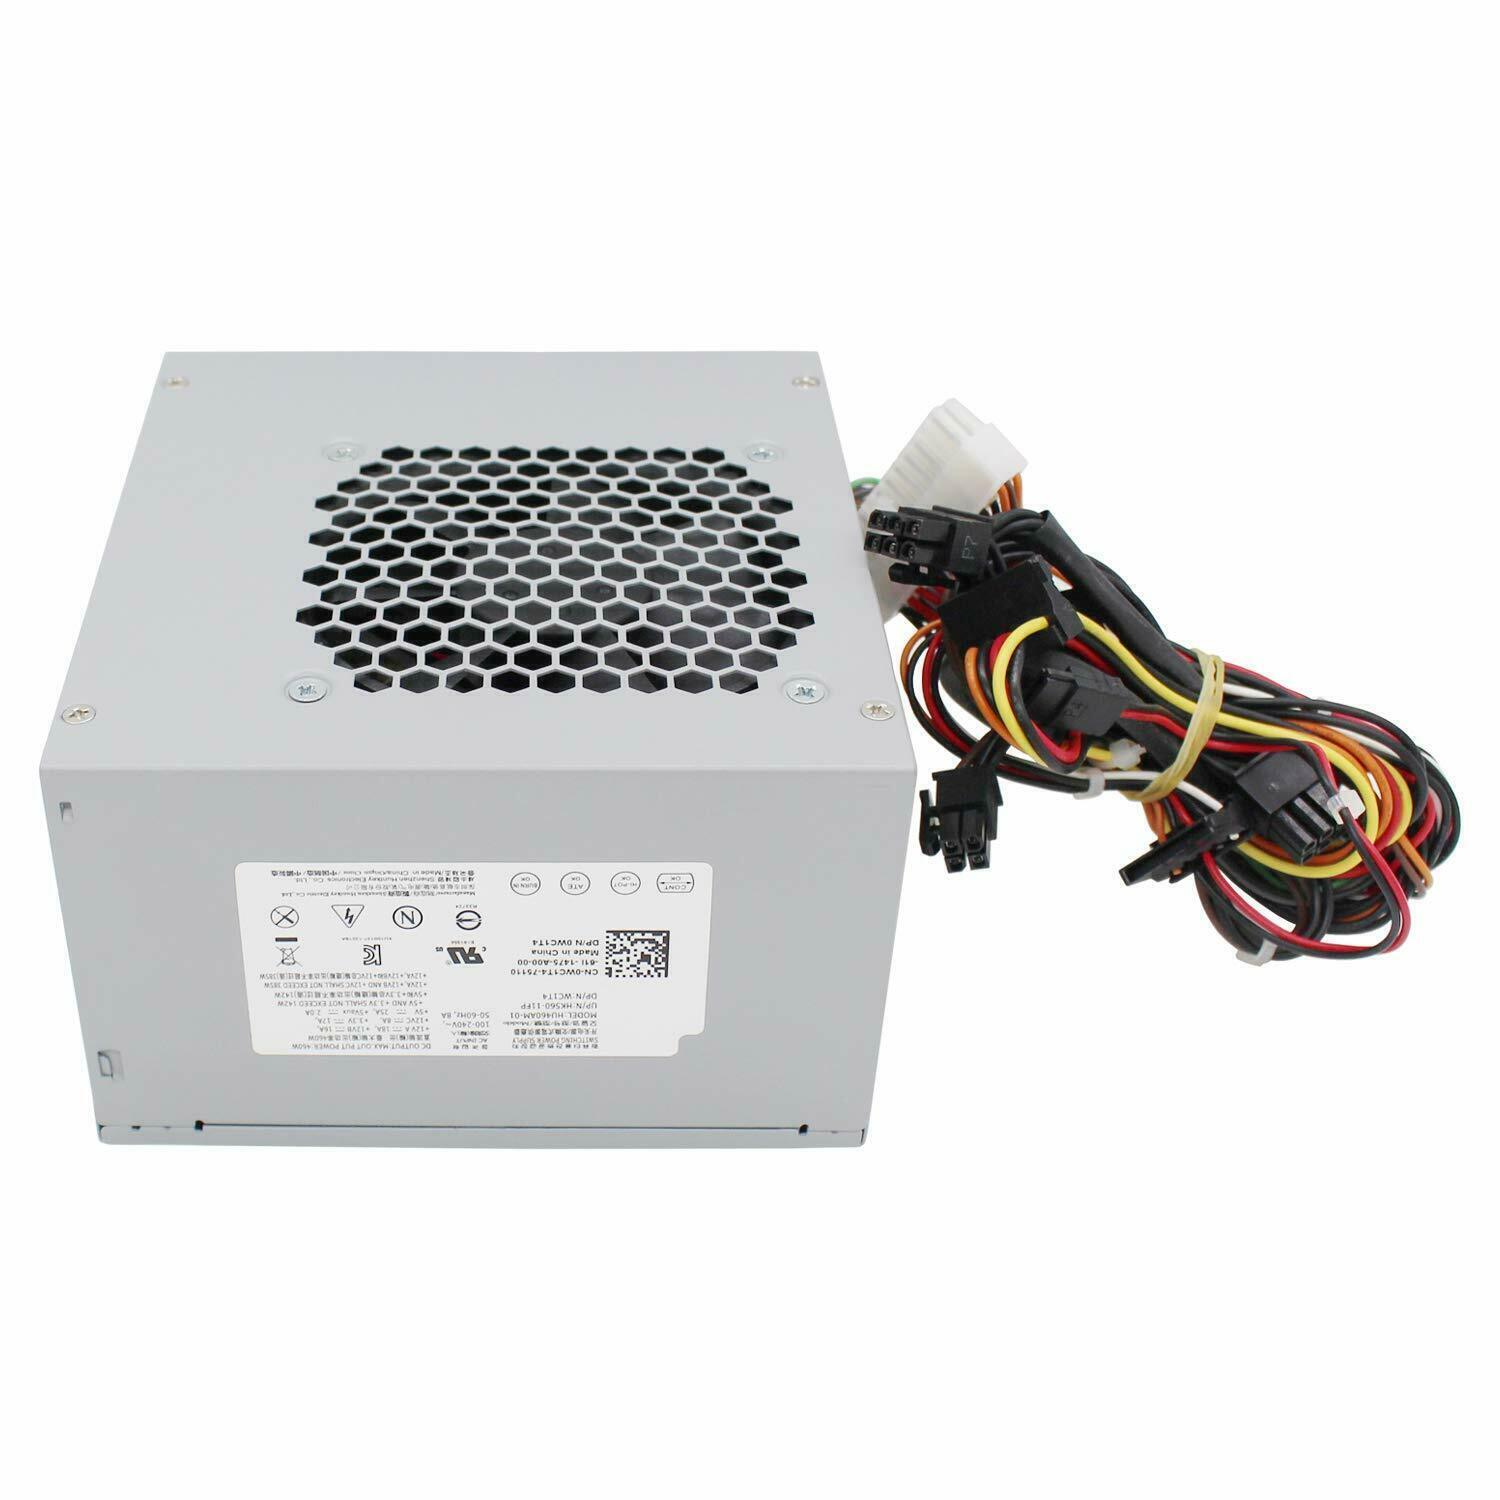 460W Power Supply HU460AM-01 Fit DELL XPS 8910 8920 Alienware Aurora R5 WC1T4 US